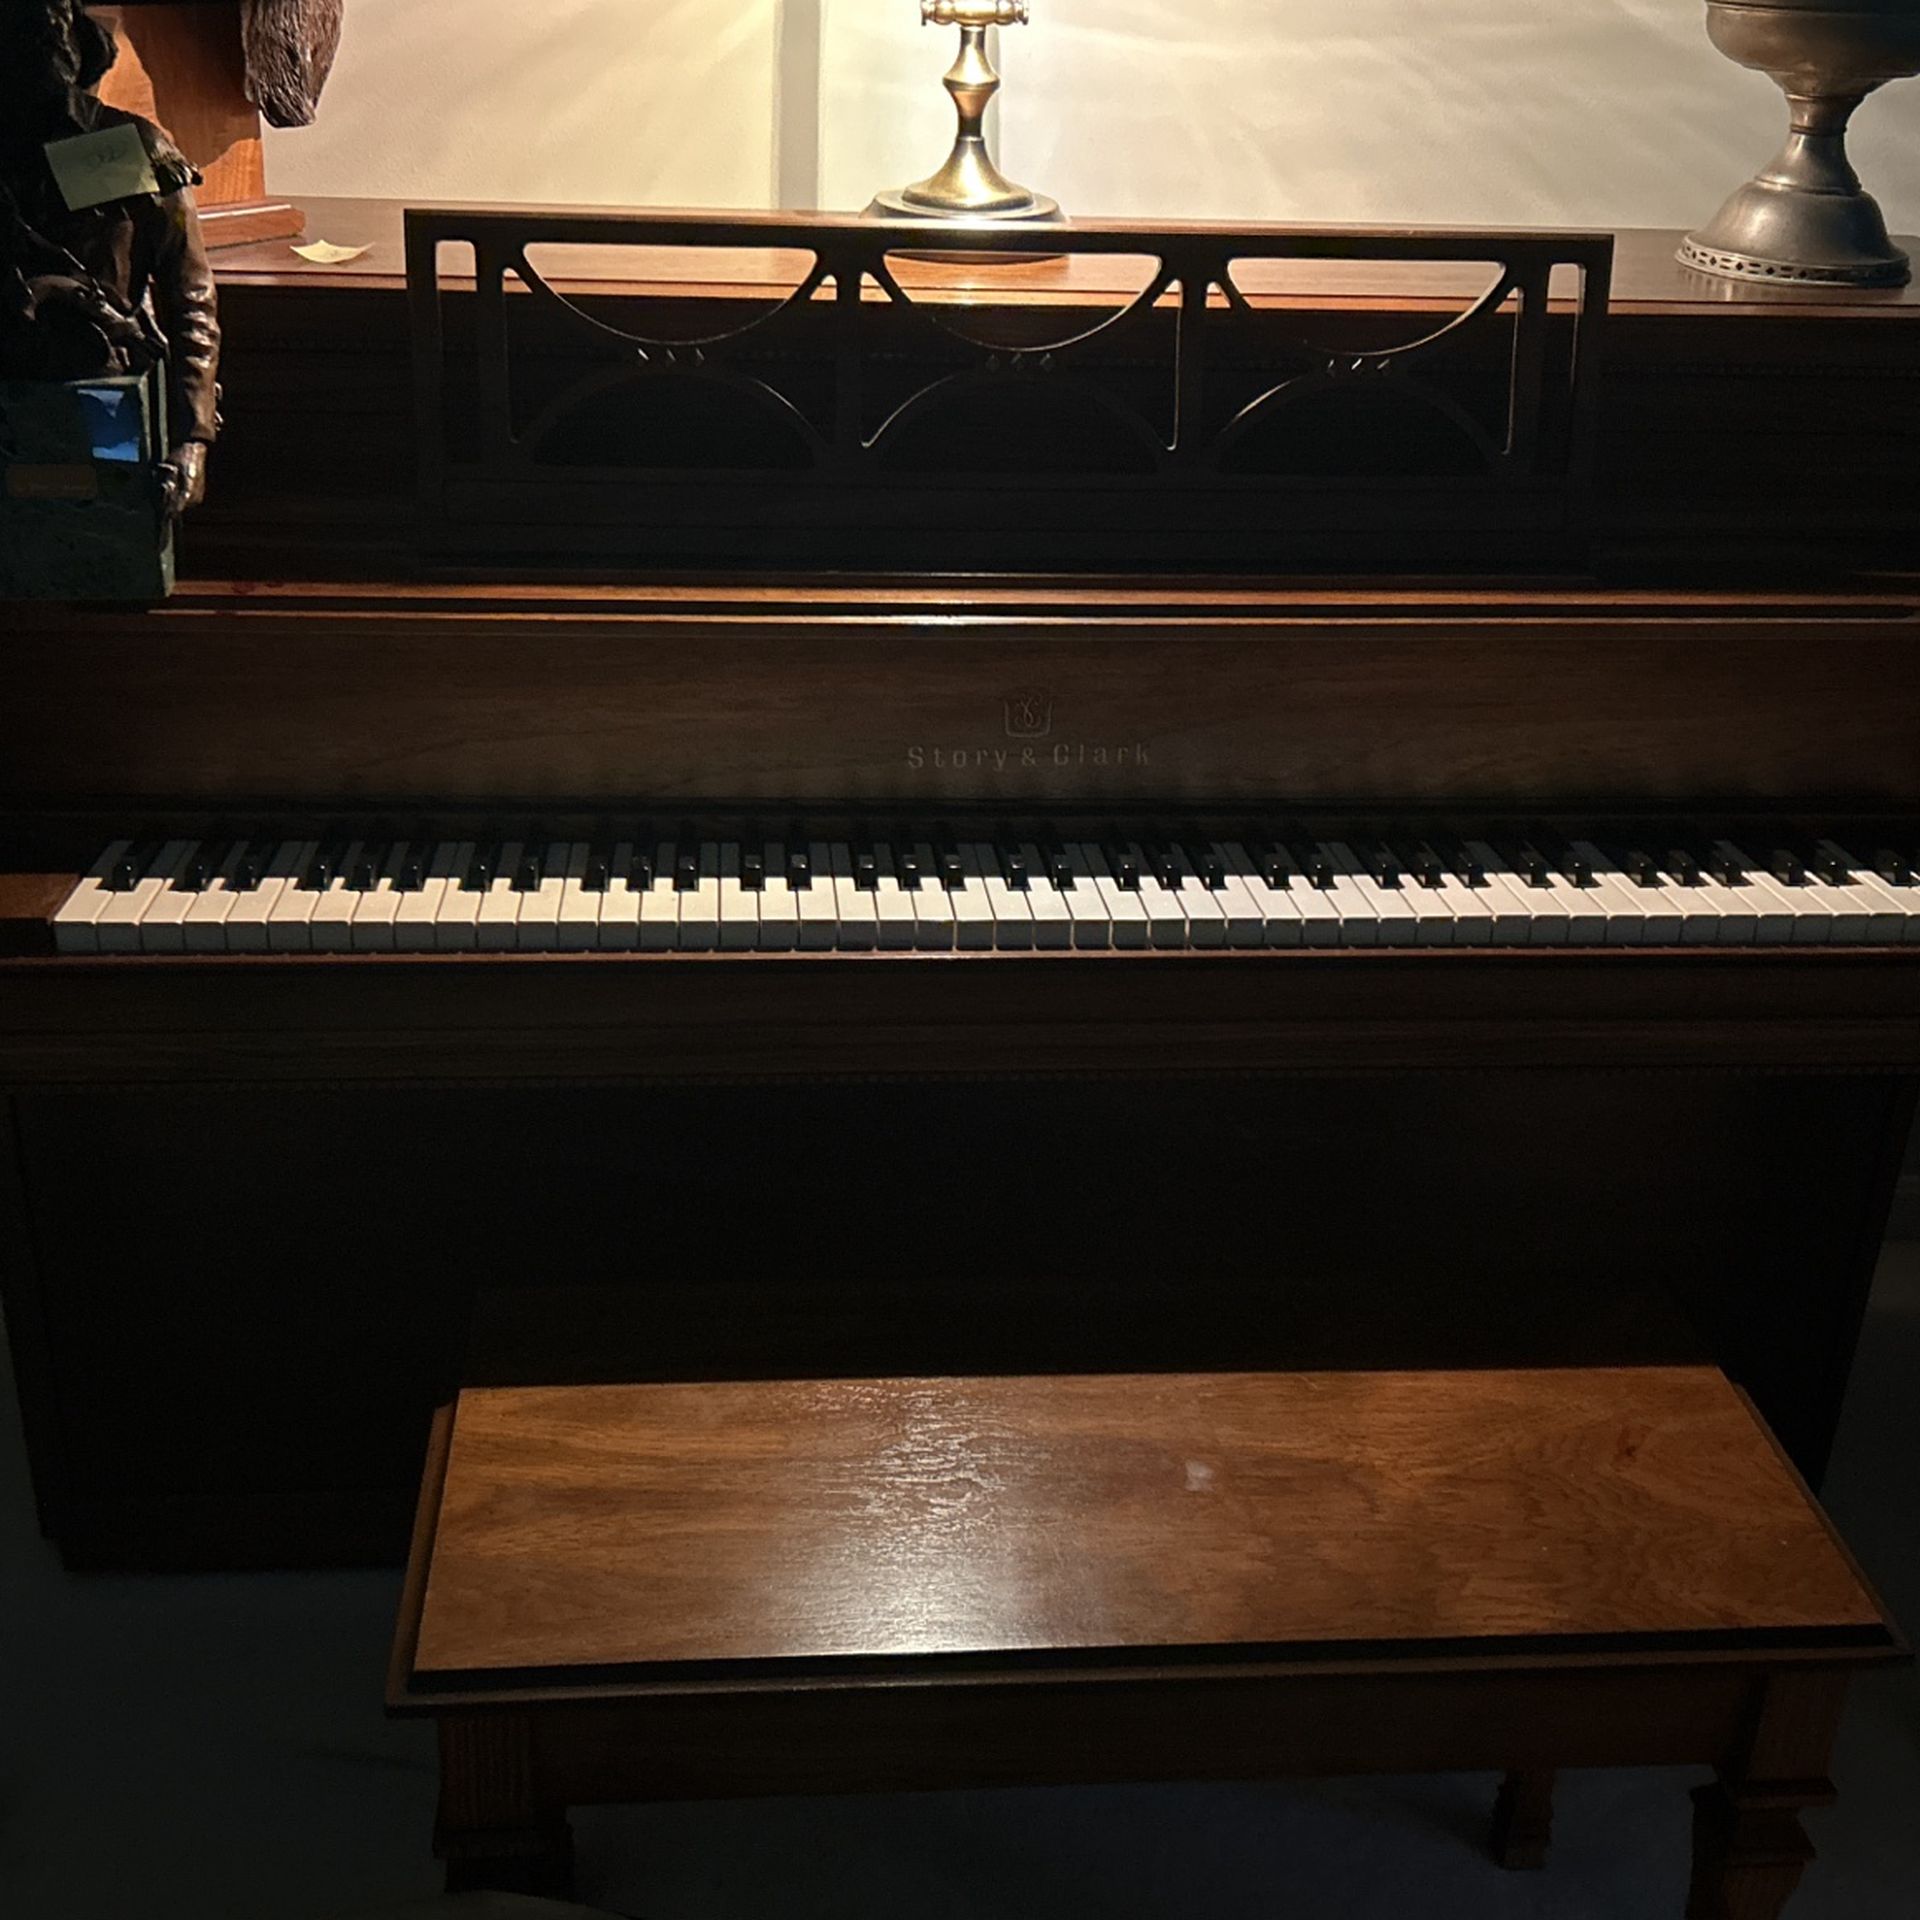 Story And Clark Piano 